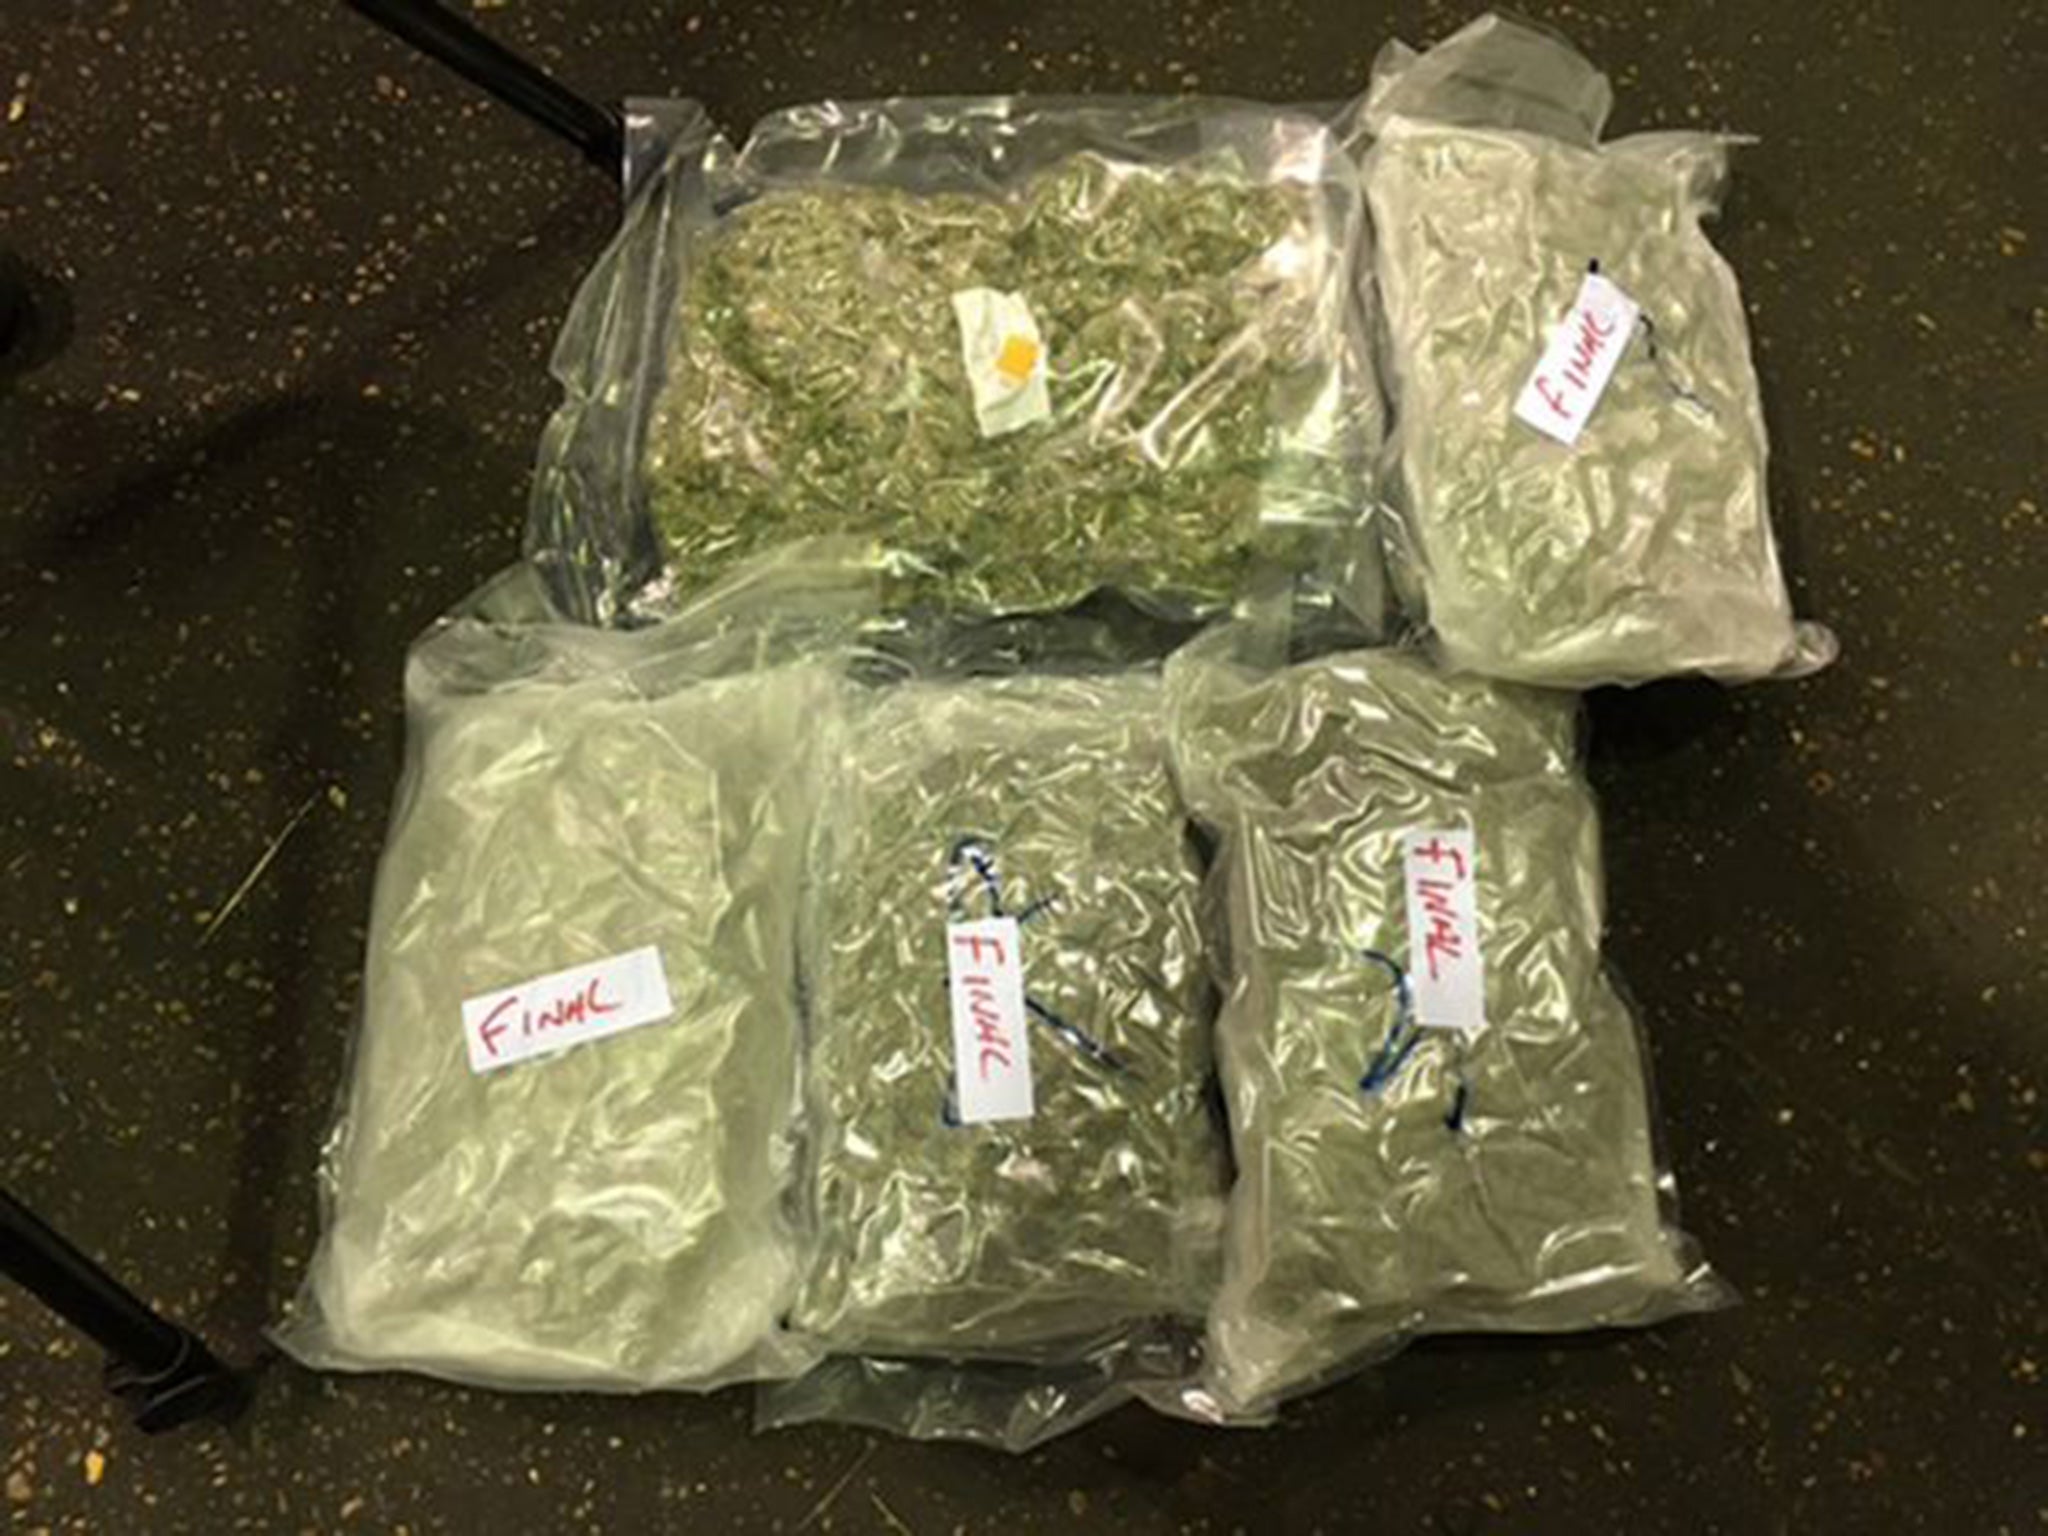 Somme of the haul of drugs that was uncovered when police were called to reports of a man trying to steal herbal tea